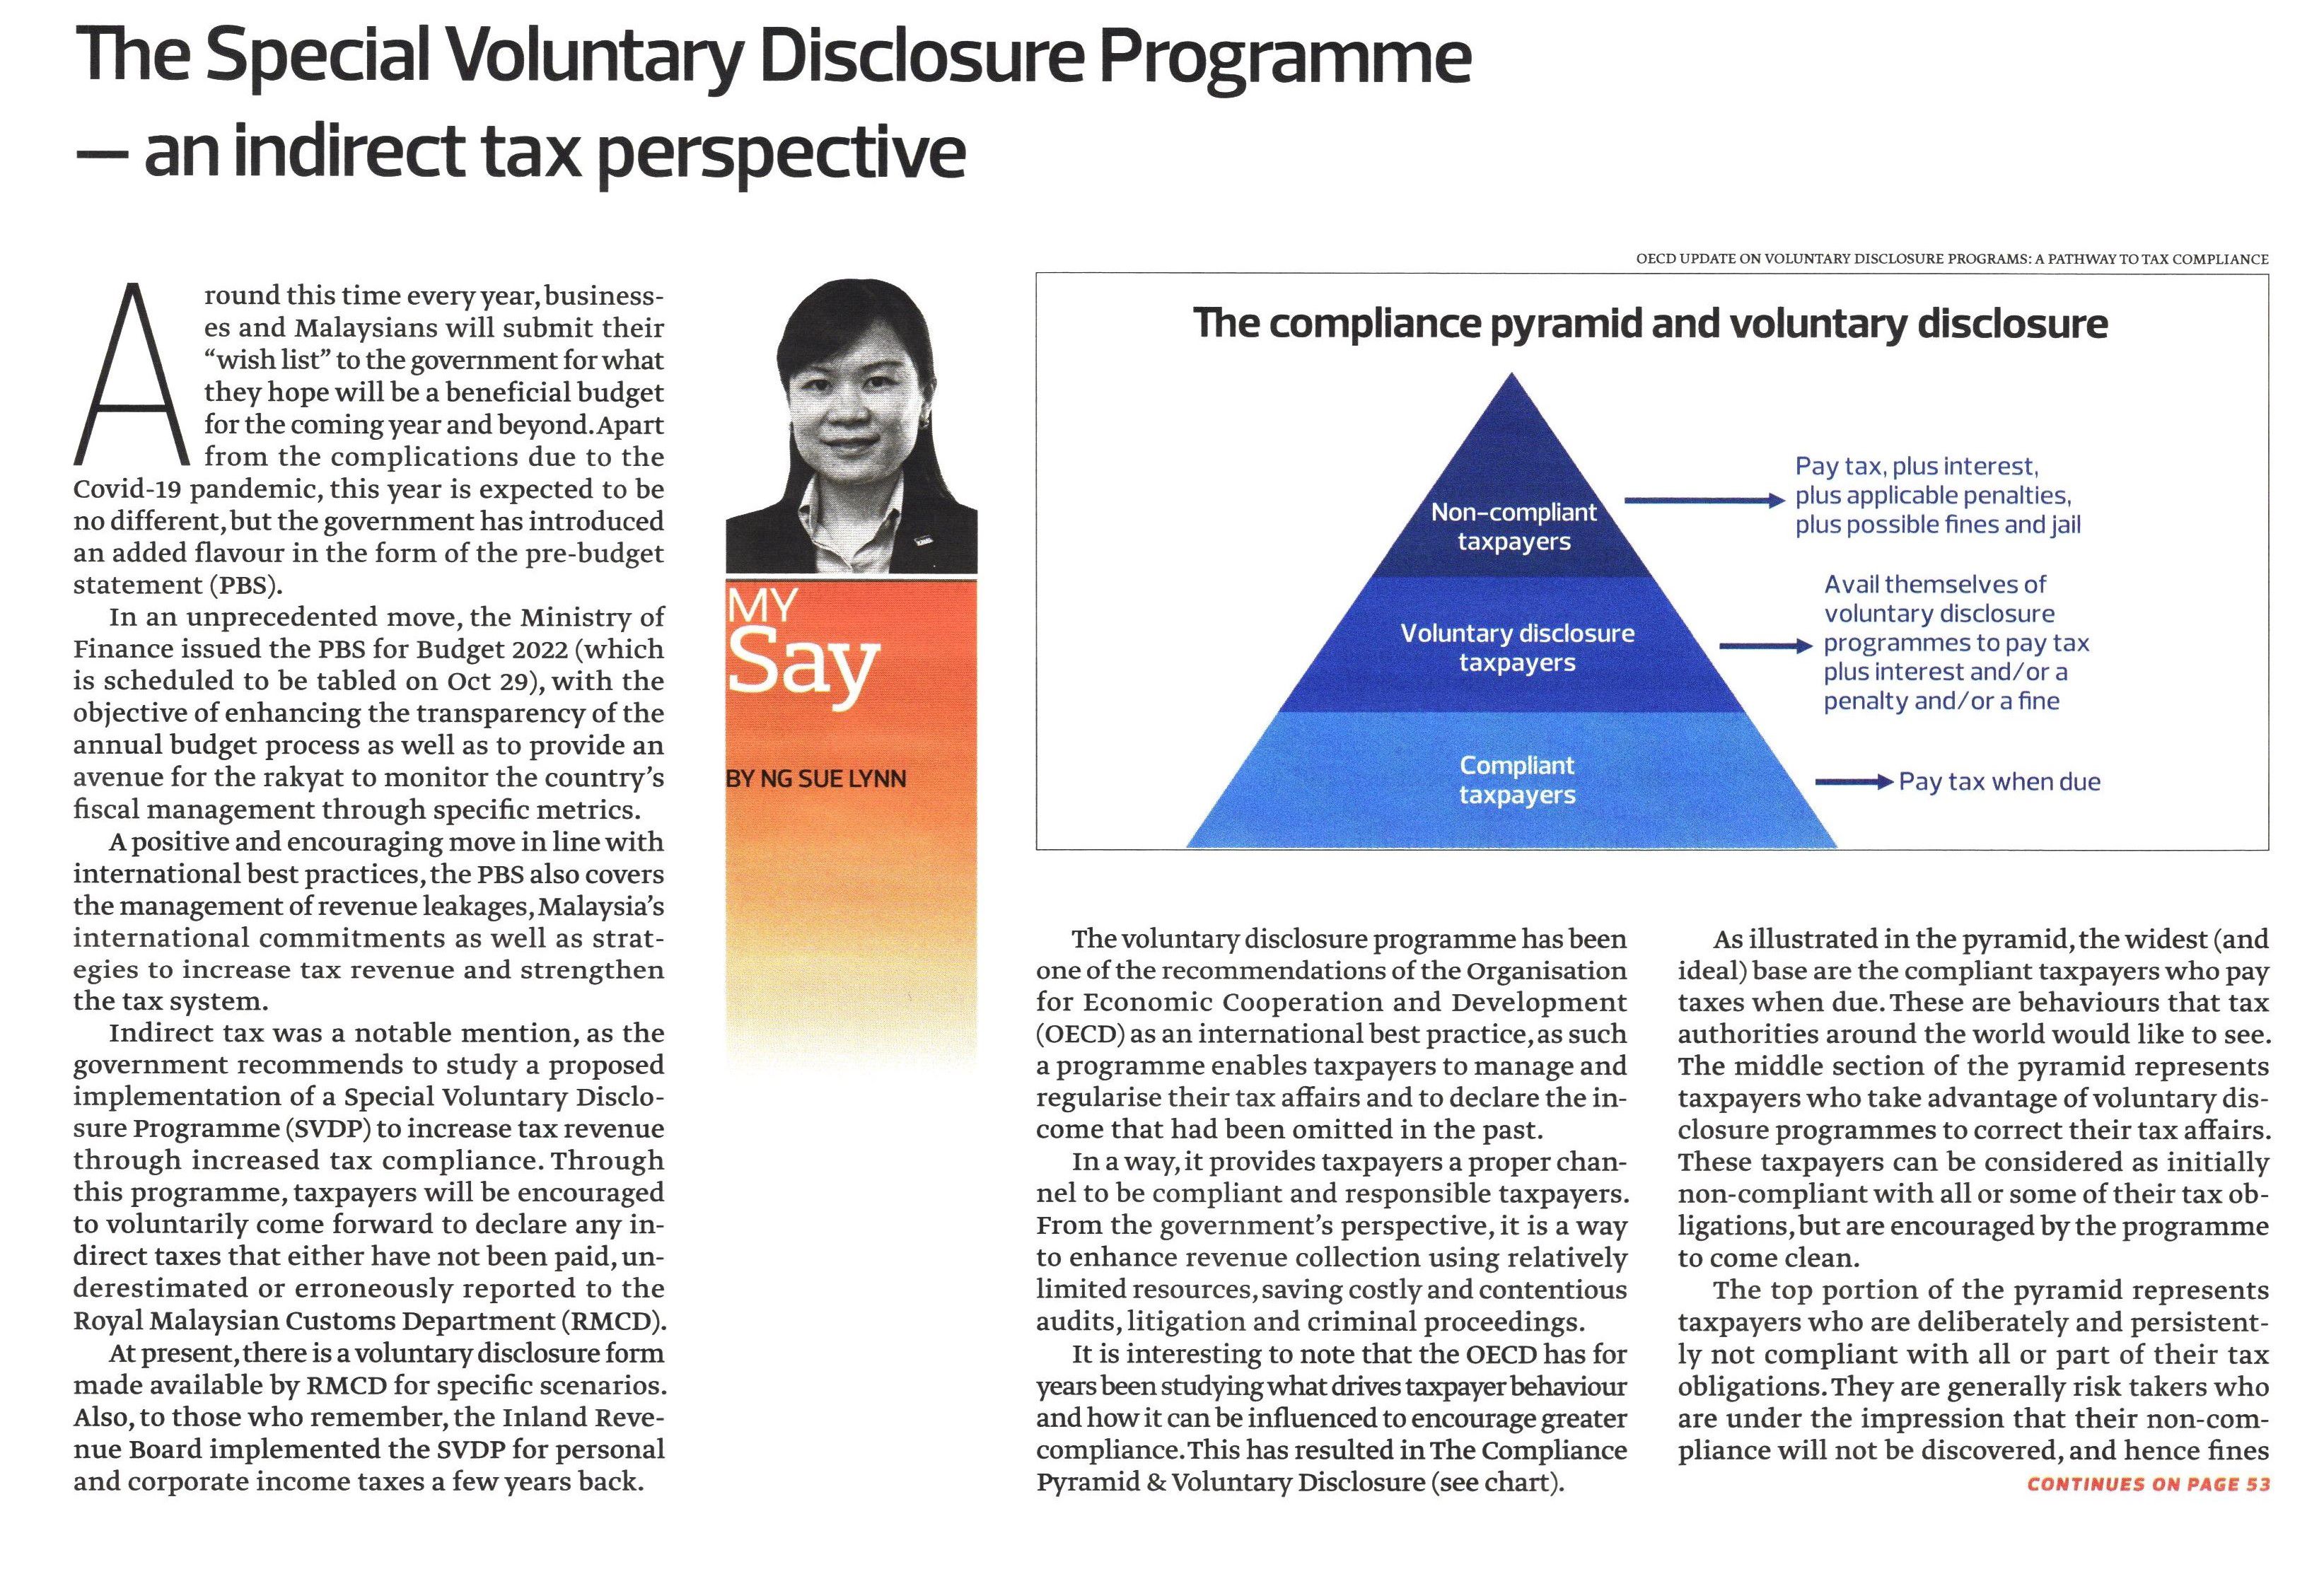 The Special Voluntary Disclosure Programme – an indirect tax perspective